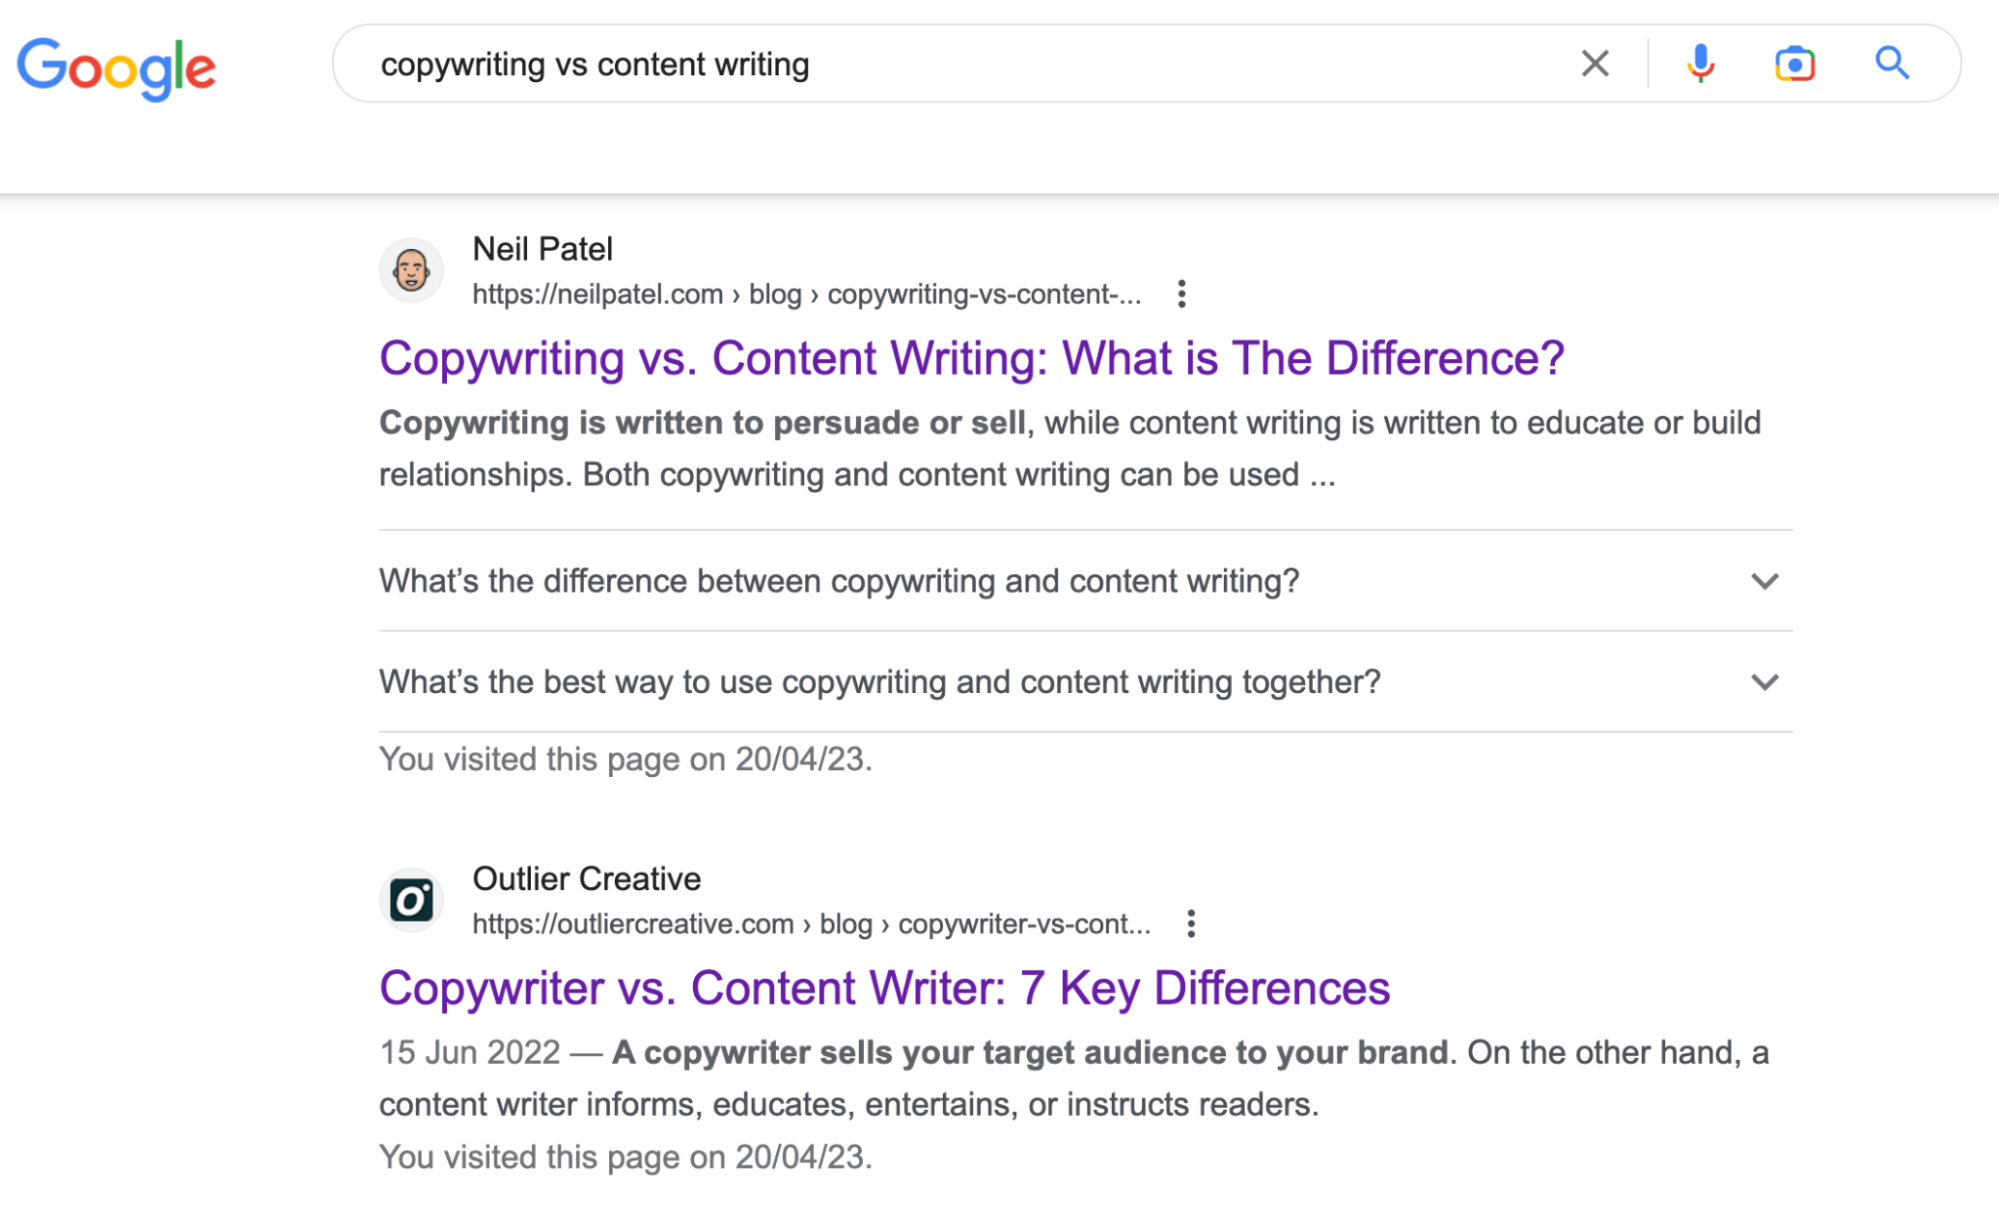 Google search results for "copywriting vs content writing"